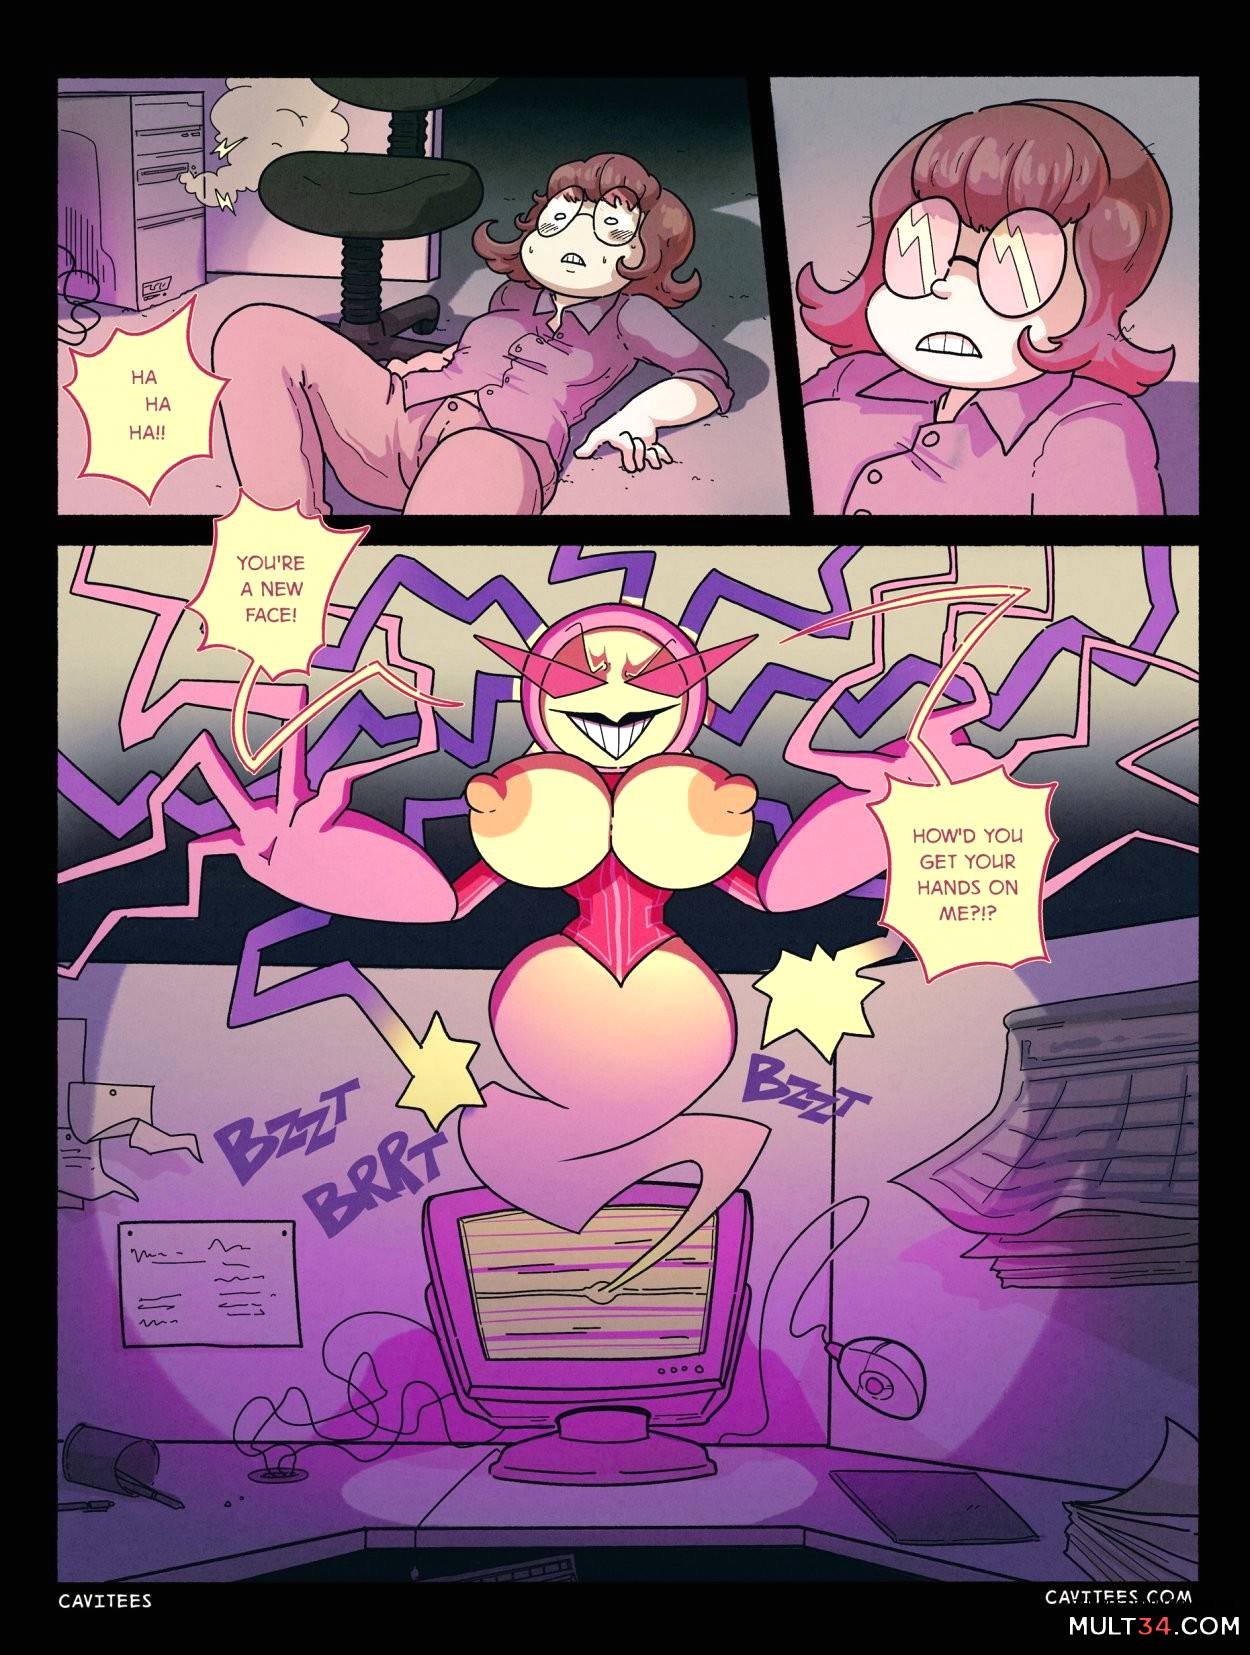 RE: PROGRAMMED page 6